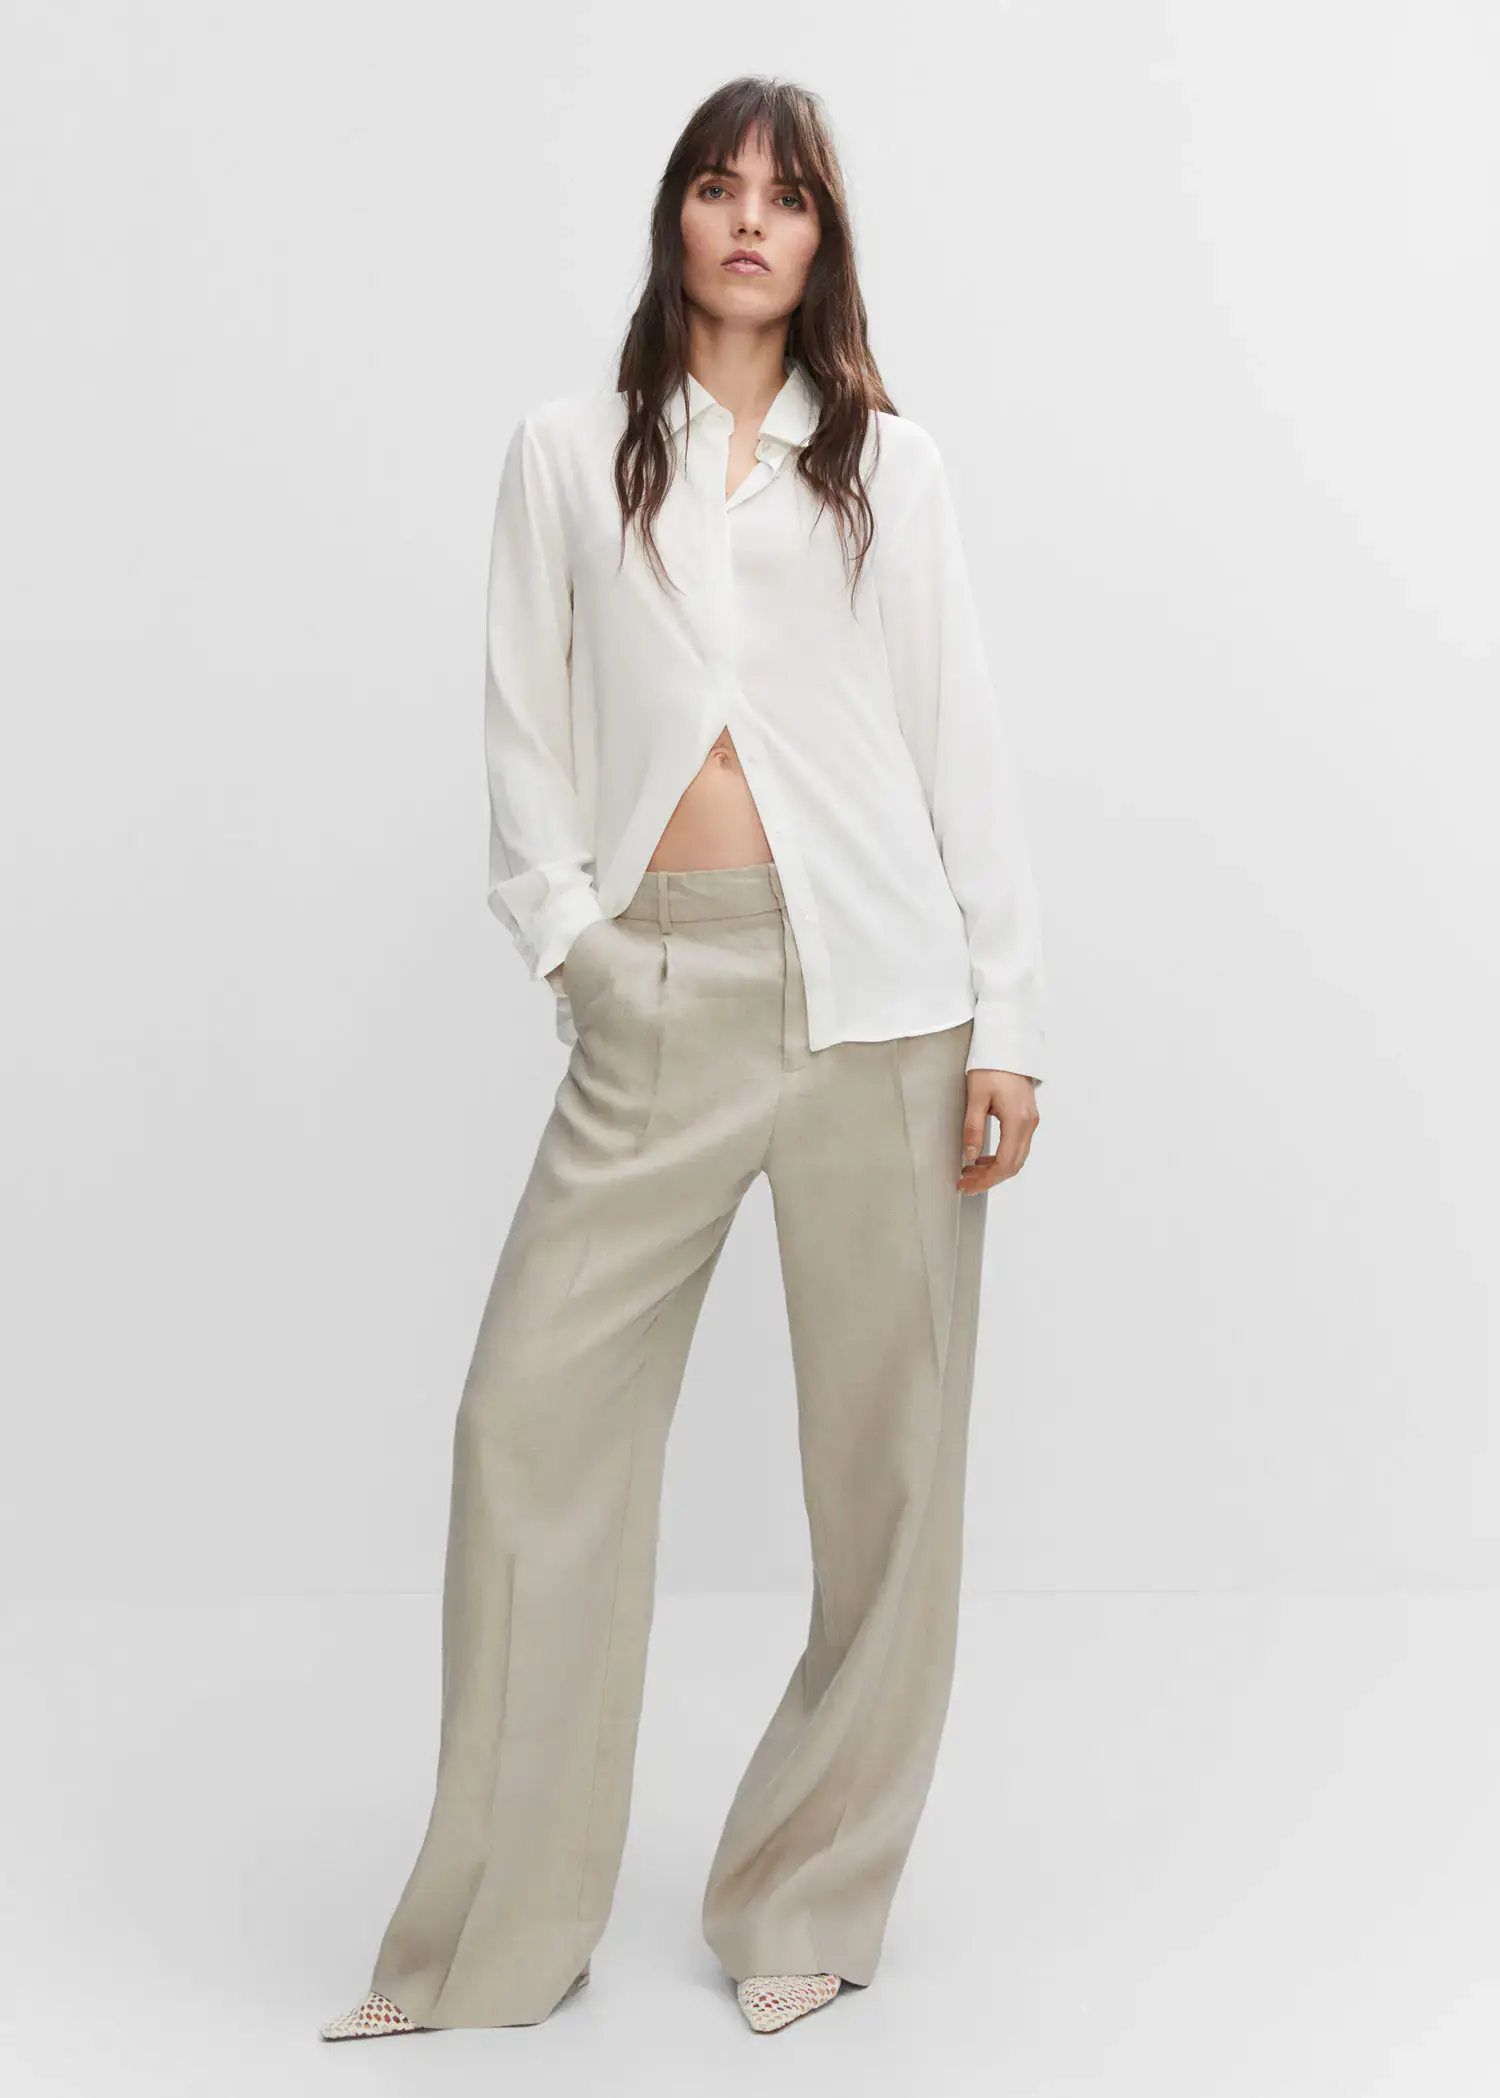 Mango Buttoned flowy shirt. a woman in a white shirt and beige pants. 